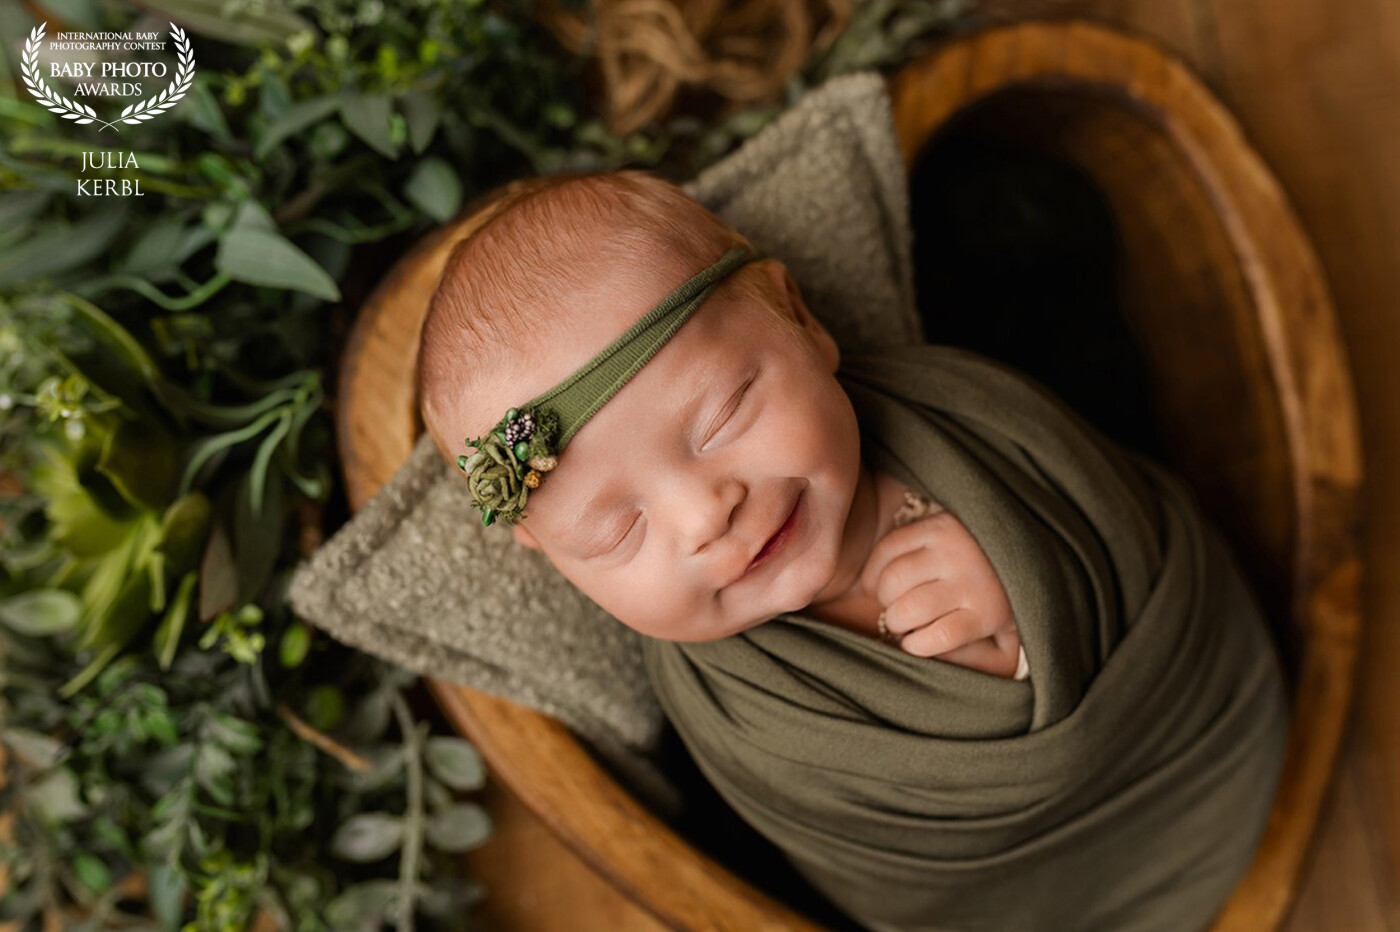 A newborn babygirl peacefully sleeps in a heart-shaped bowl. Her angel-smile radiates a sense of cosiness and warmth.